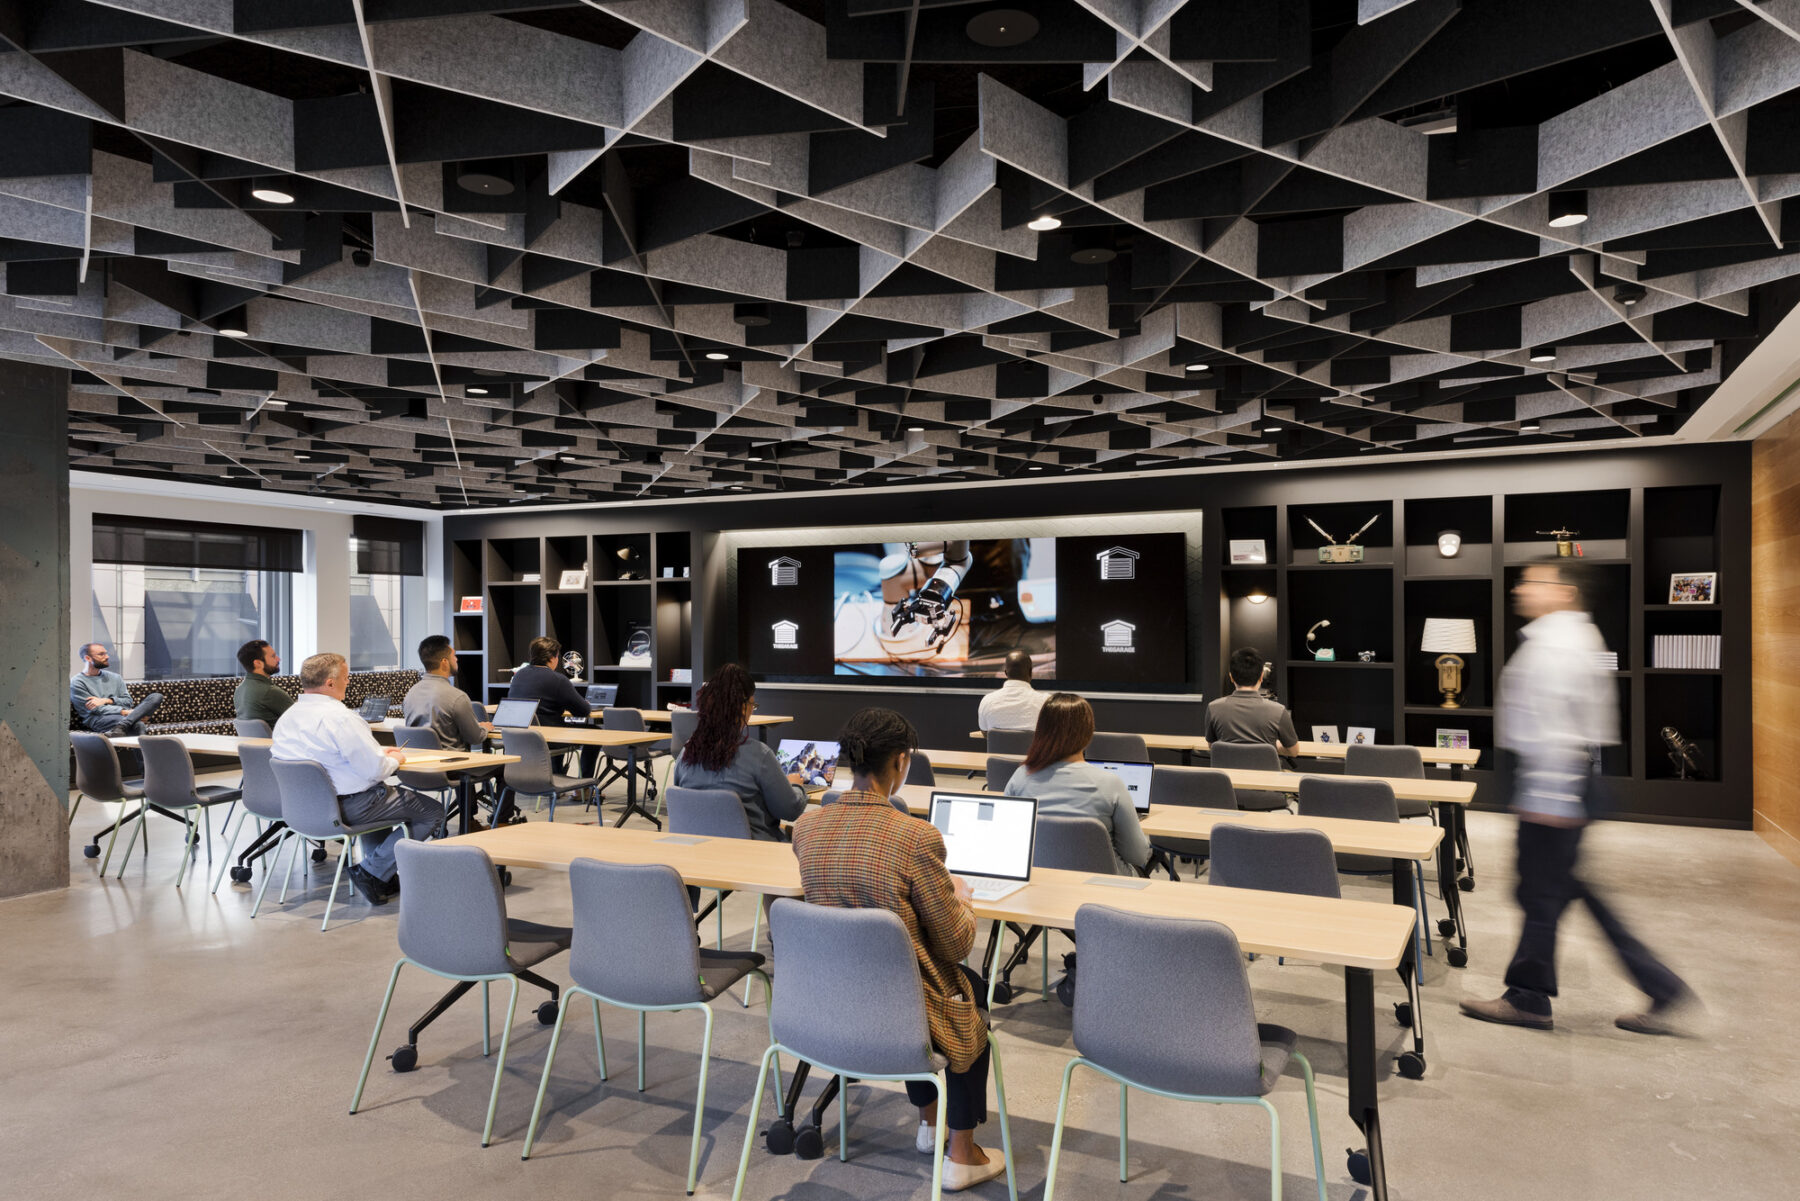 Open meeting room with large interactive screen at the front